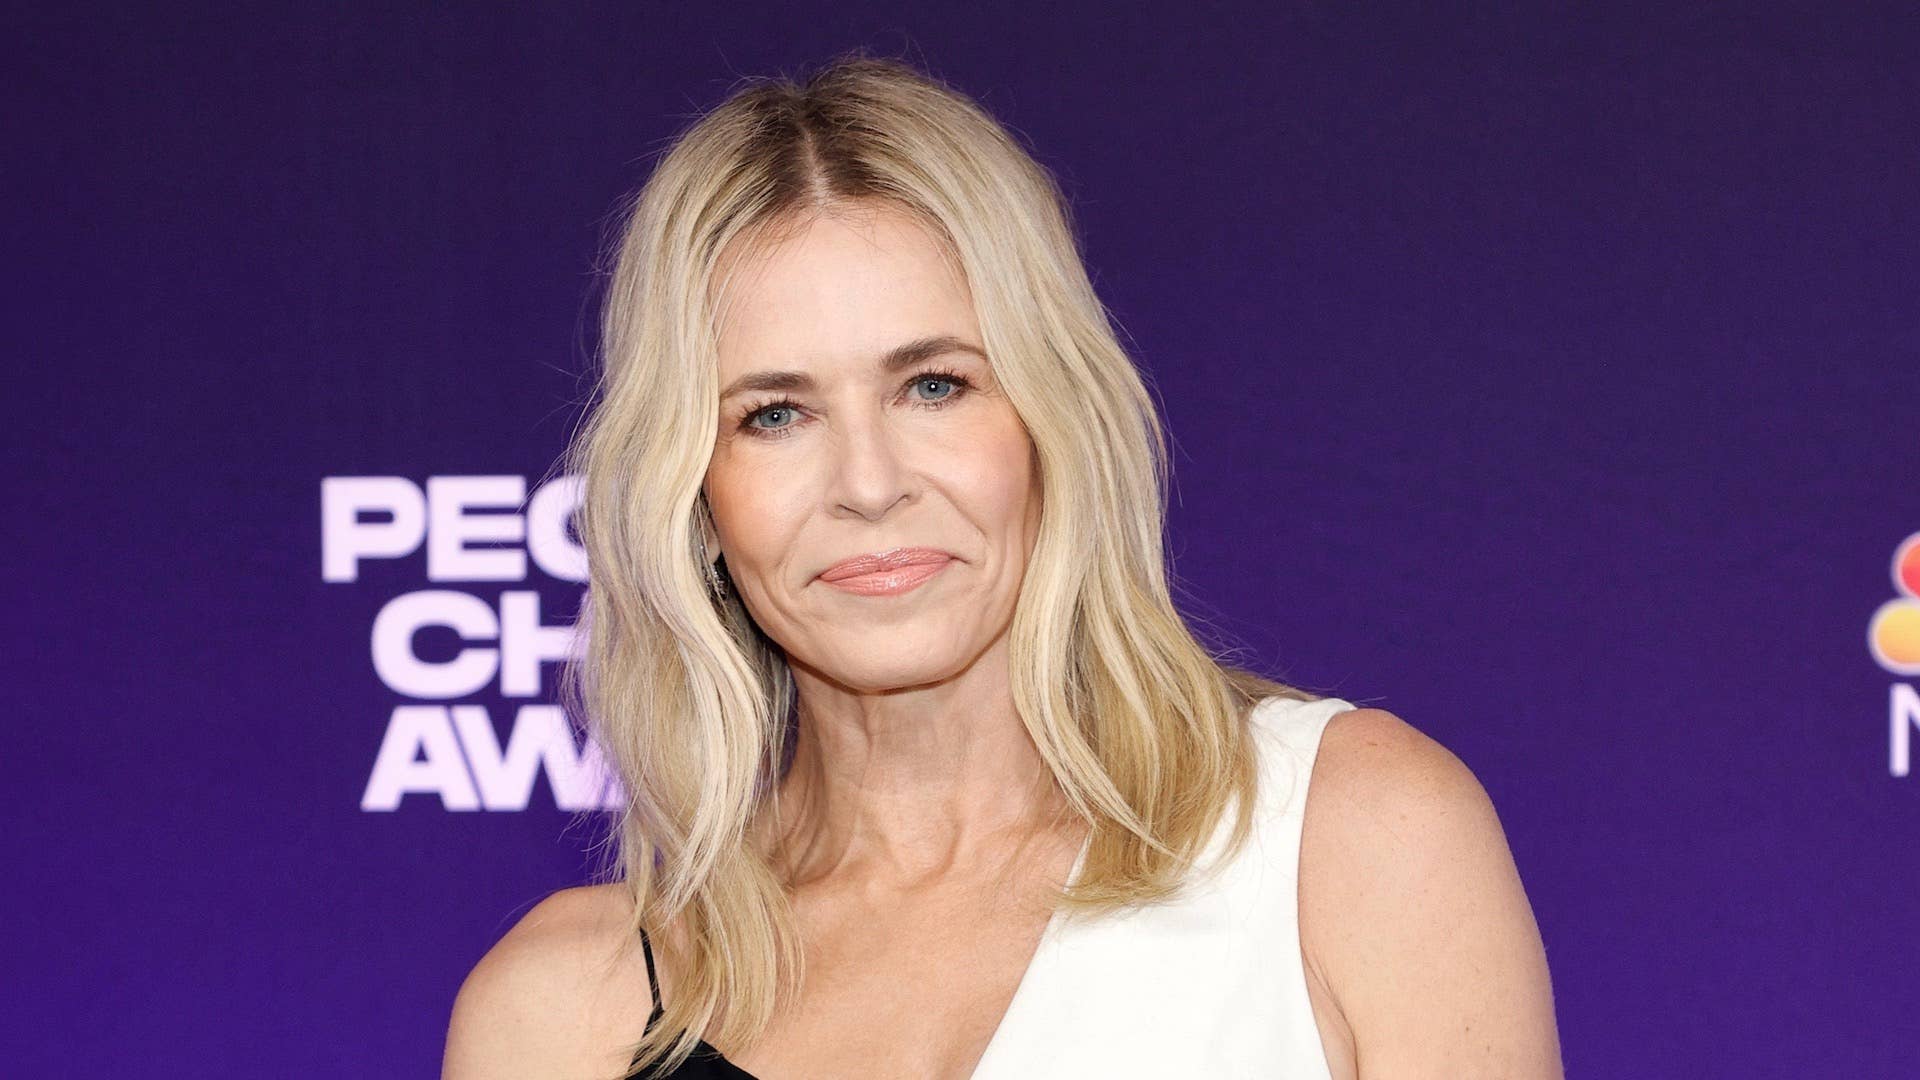 Chelsea Handler attends the 47th Annual People's Choice Awards